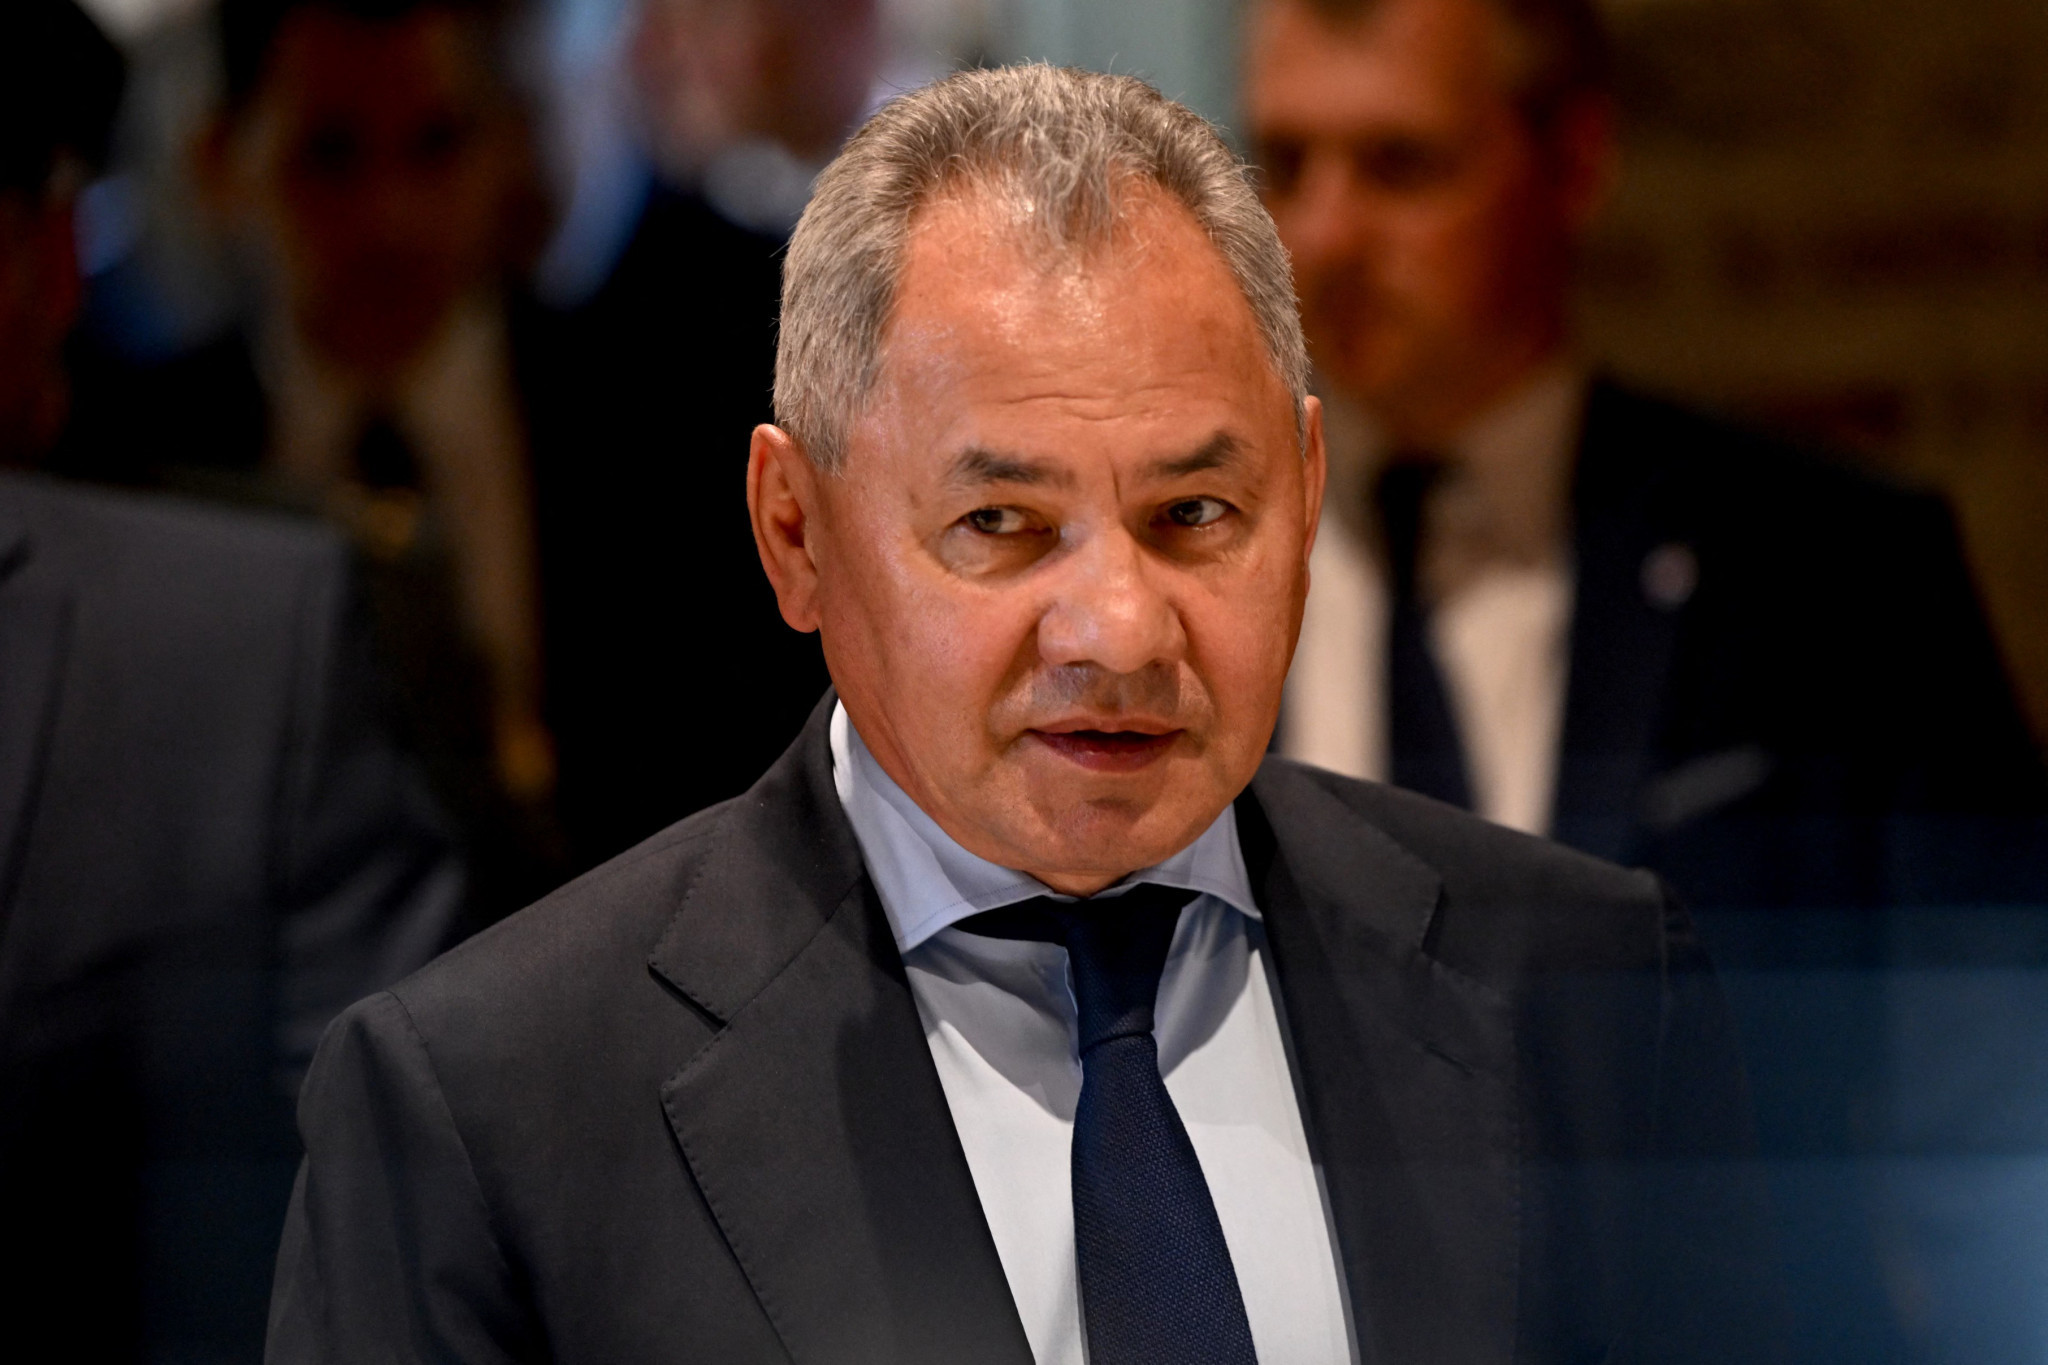 Sergei Shoigu is the Russian Defence Minister overseeing the invasion of Ukraine ©Getty Images